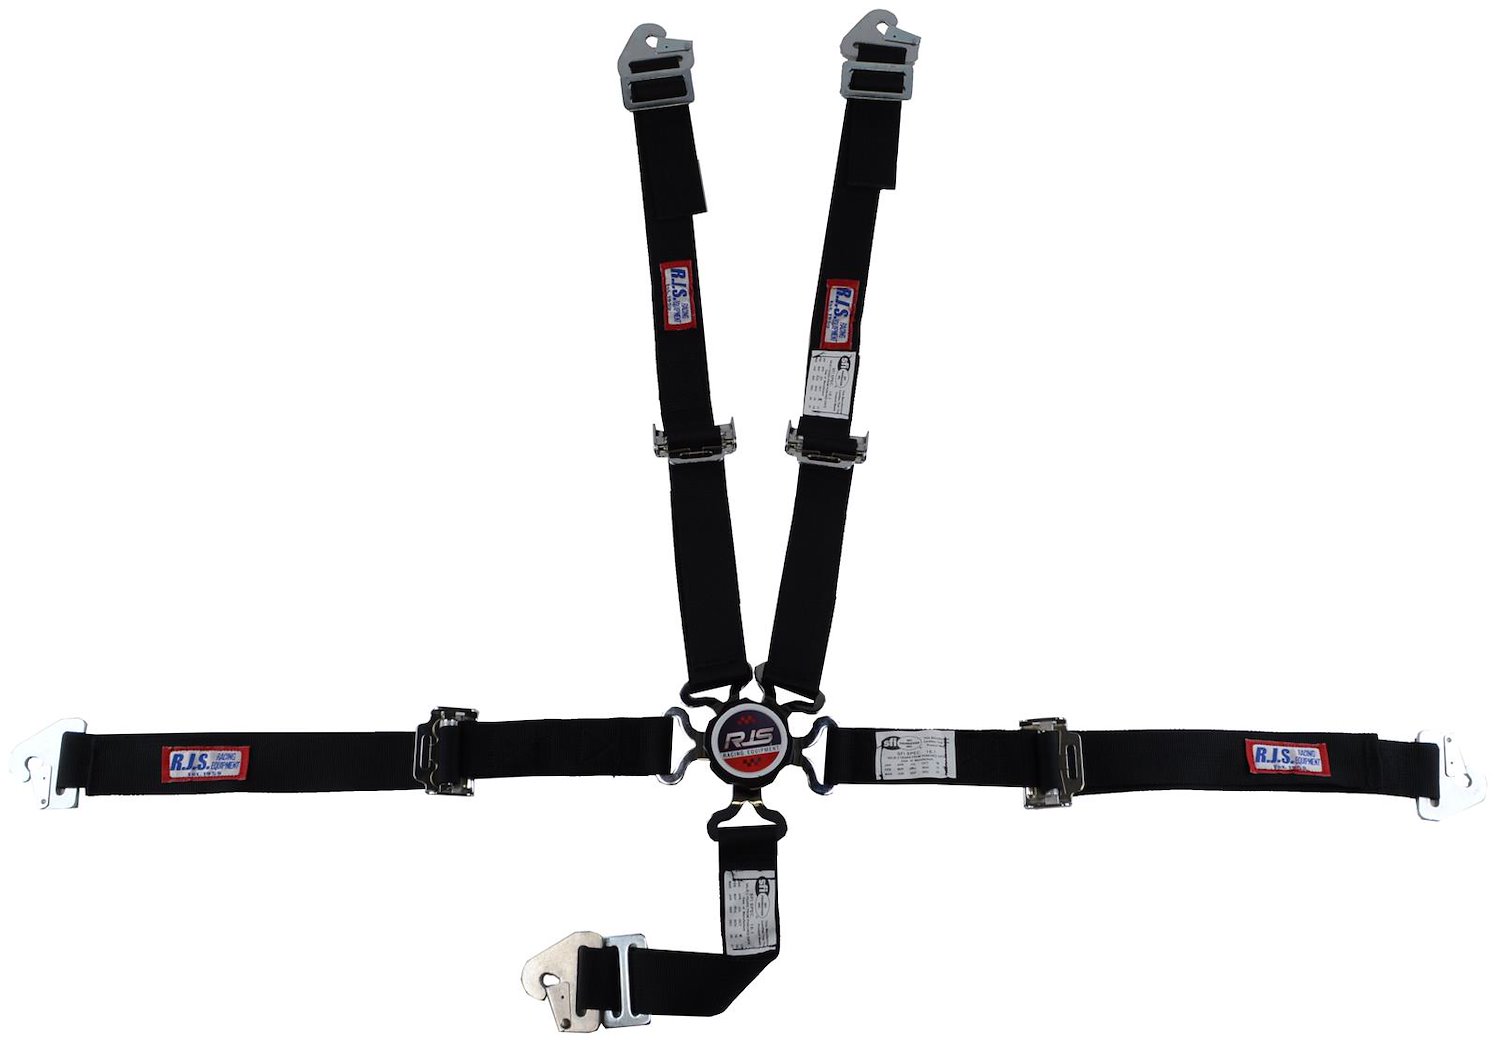 SFI 16.1 CAM-LOCK HARNESS 2 PULL DOWN Lap Belt 2 Shoulder Harness Individual ROLL BAR Mount 2 DOUBLE Sub ALL WRAP ENDS BLACK